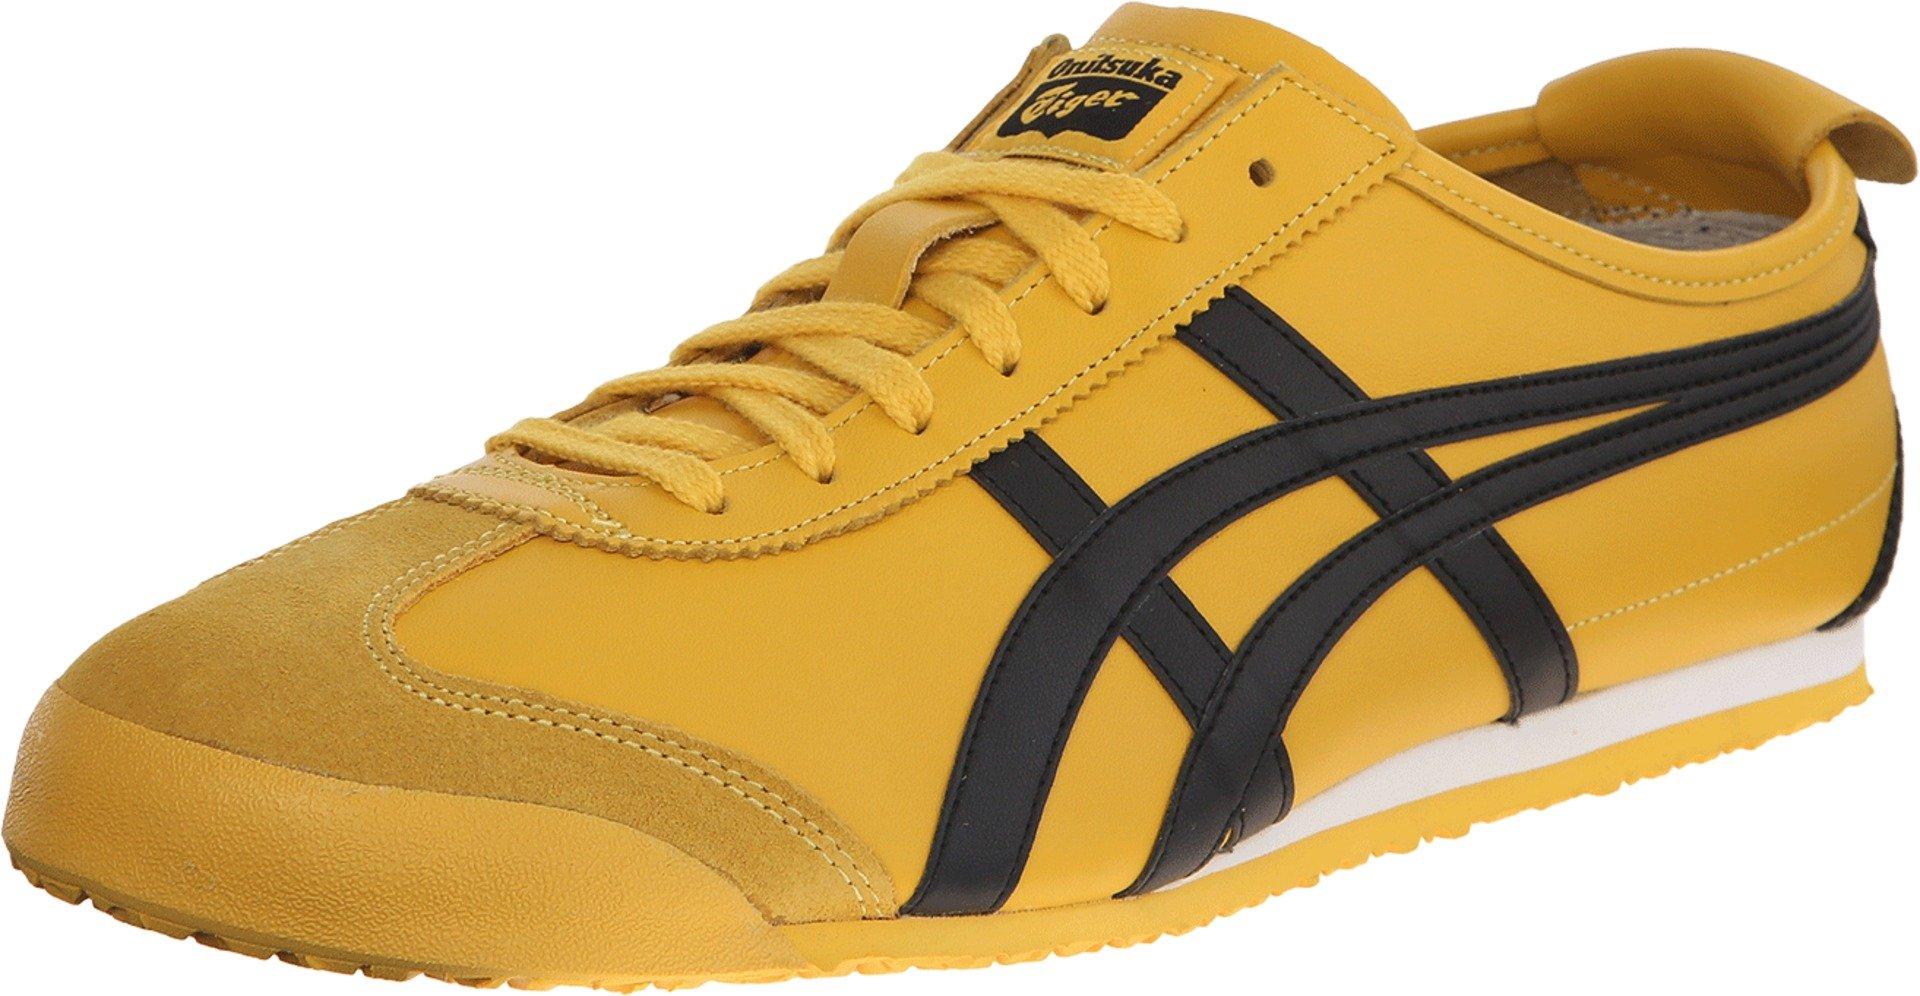 Onitsuka Tiger Mexico 66 Leather and Suede Low-Top Sneakers in Yellow ...